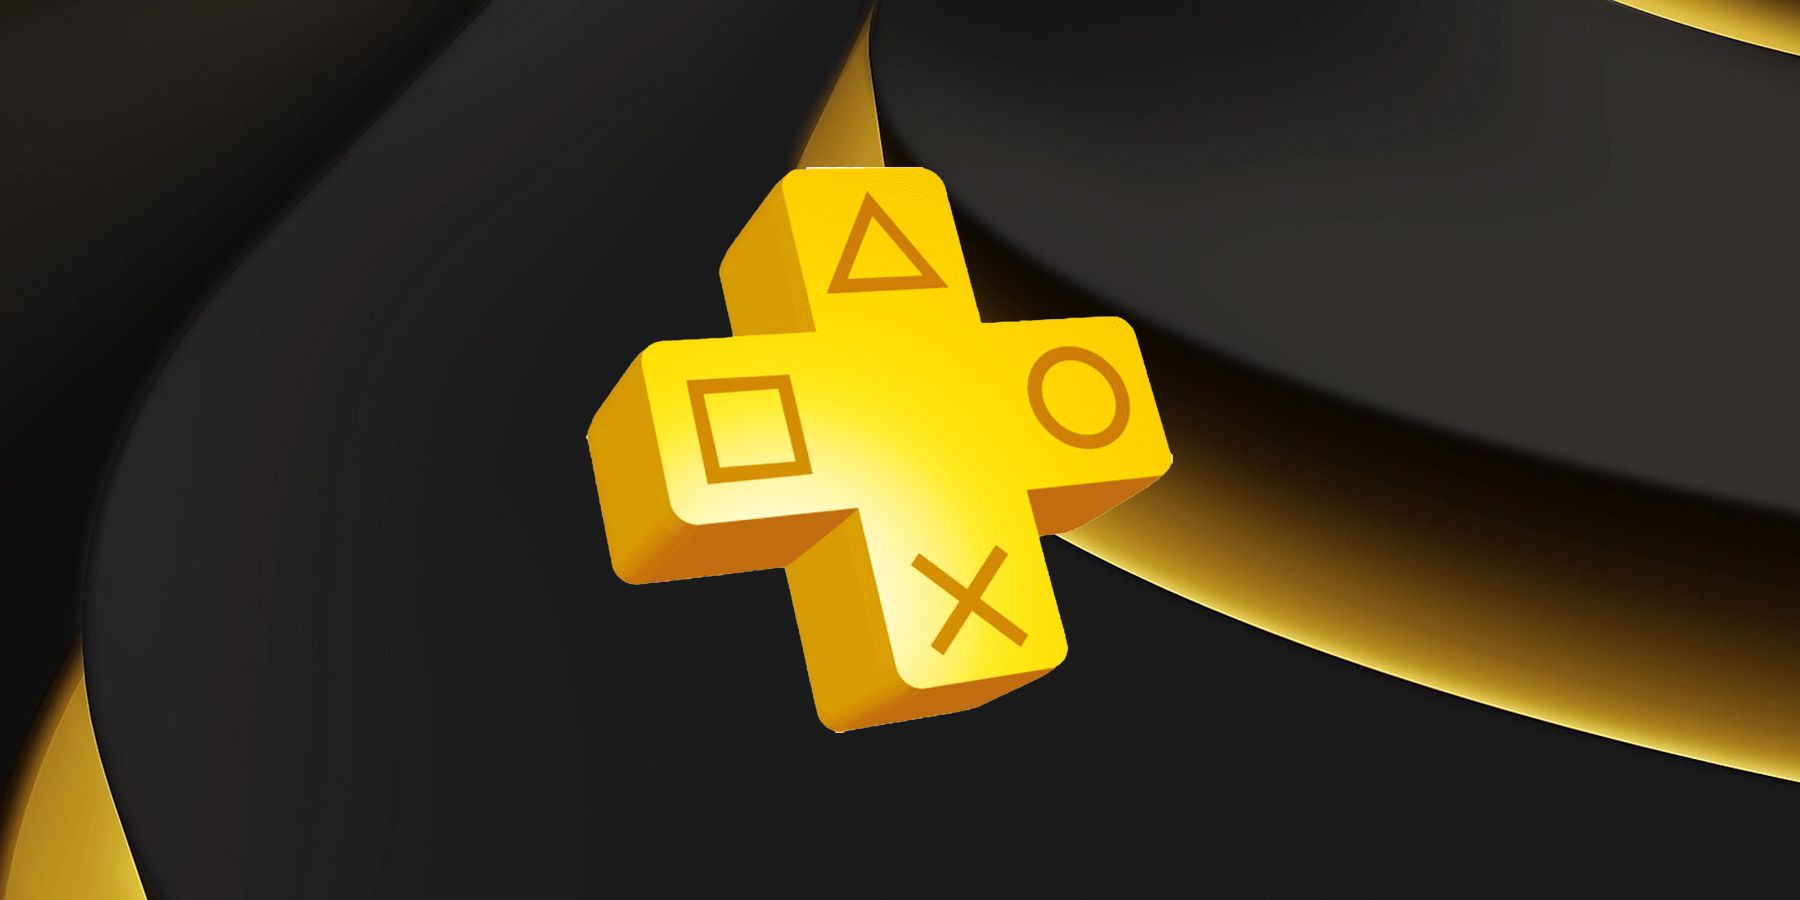 PlayStation Plus Premium: Every Cloud Game And Game Trial - Updated July,  2022